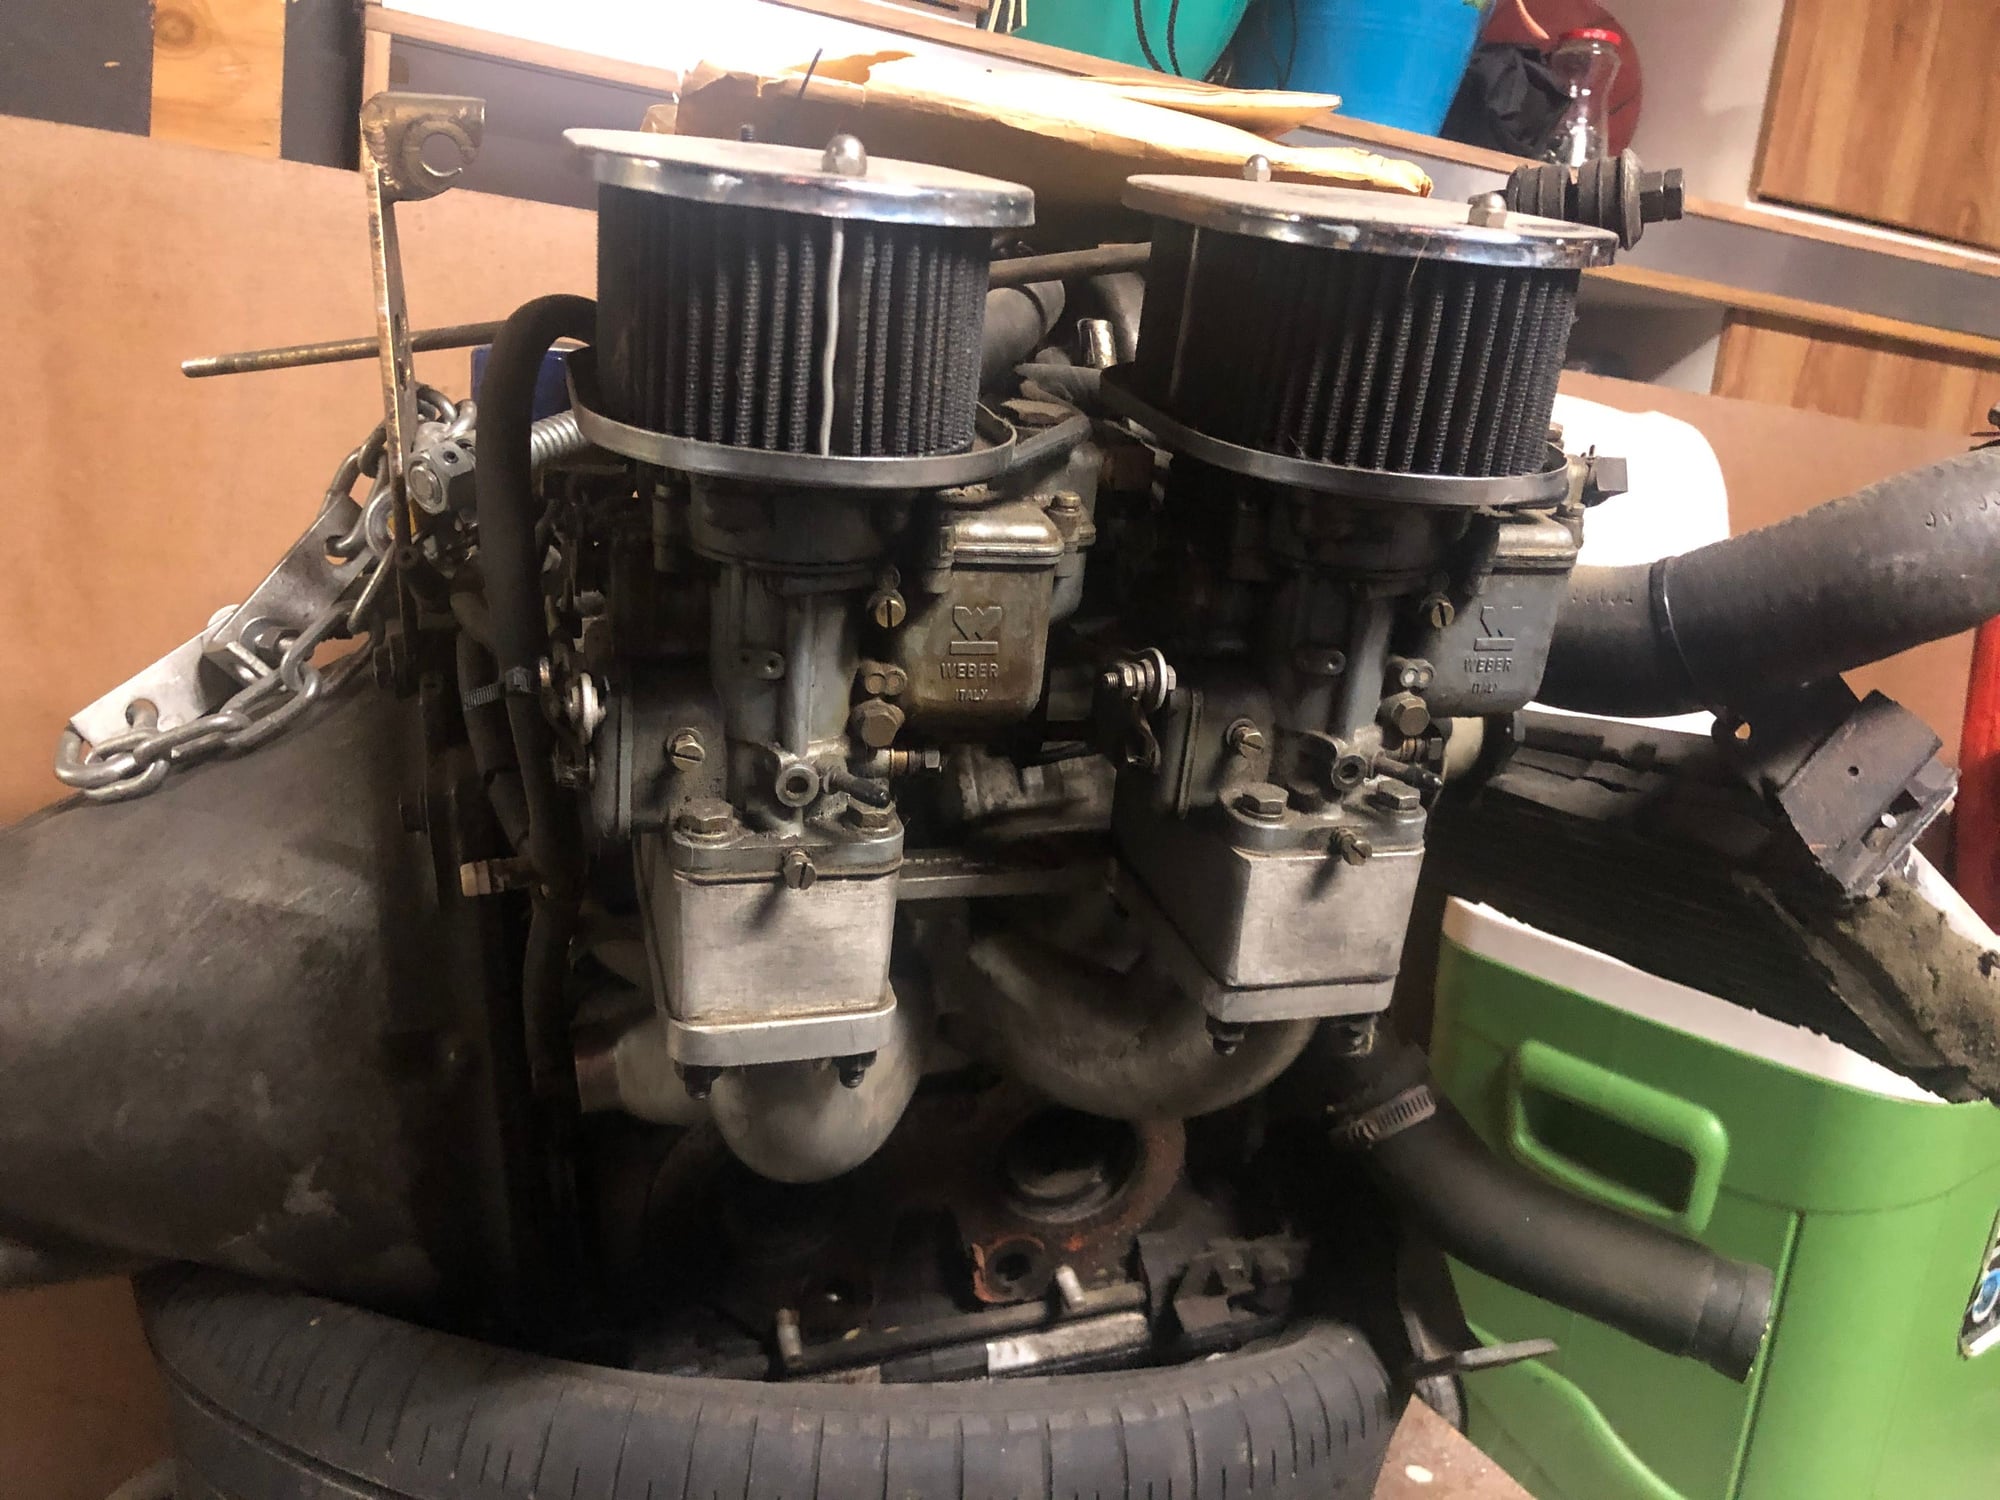 Engine - Complete - RARE Rotary Engineering "Turbo Alternative" crate motor - 13B, dual Weber 36DCD carbs - Used - Denver, CO 80227, United States